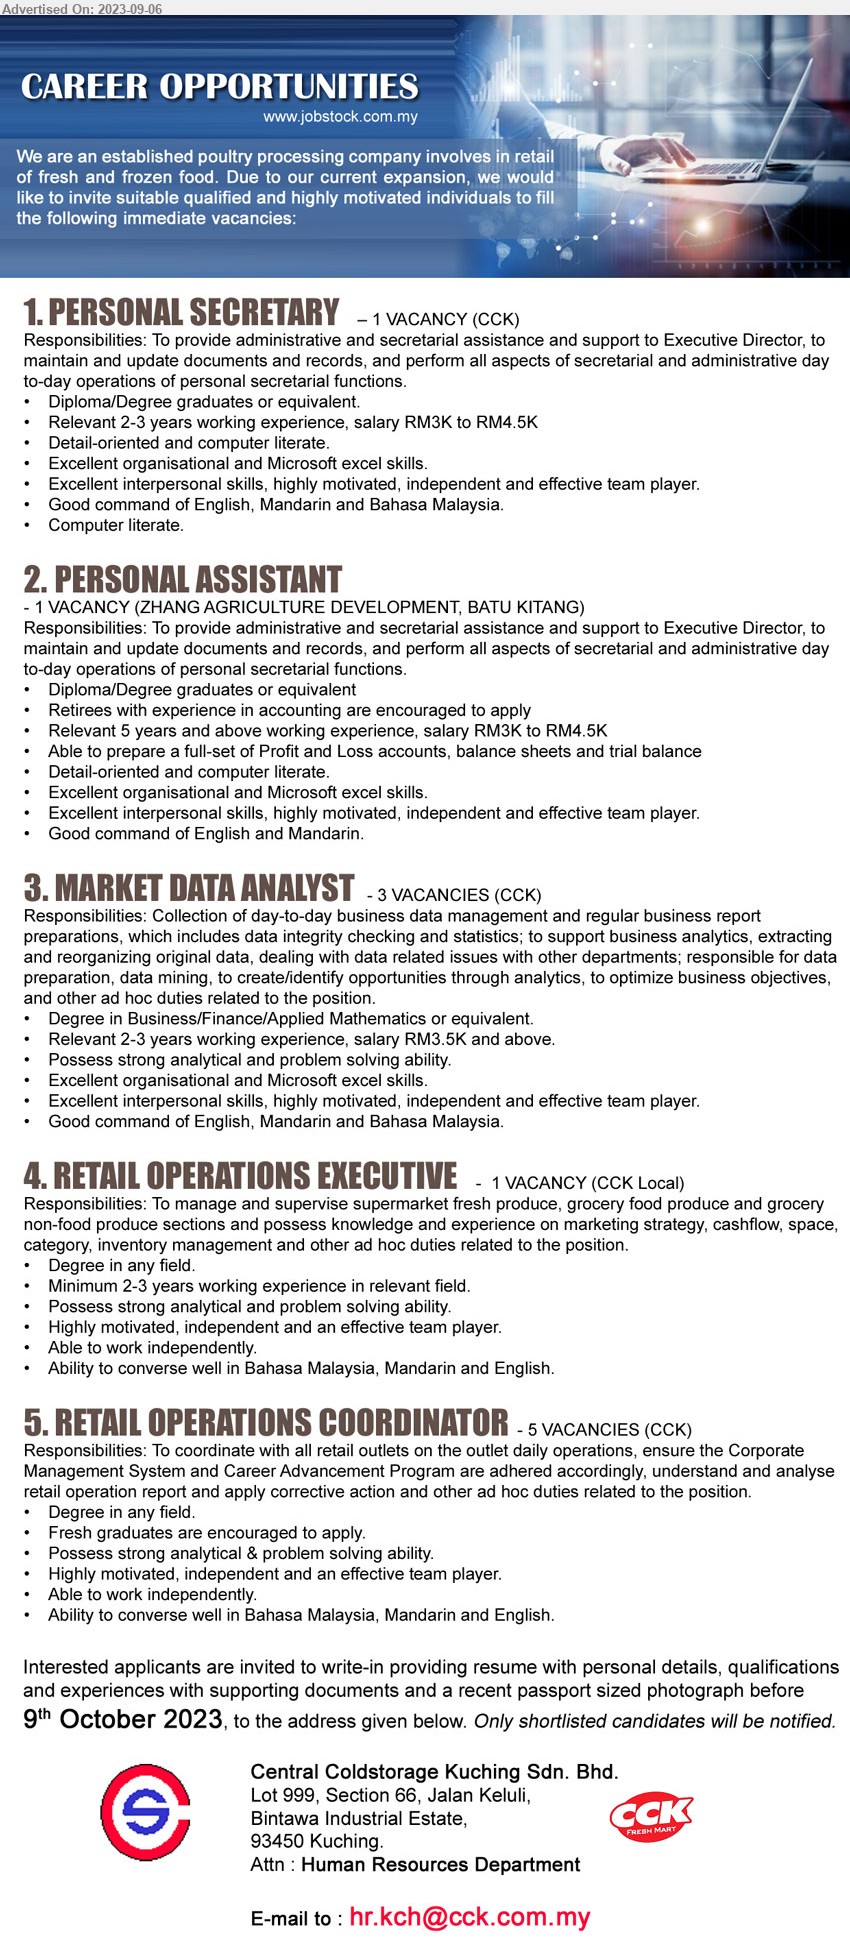 CENTRAL COLDSTORAGE KUCHING SDN BHD - 1. PERSONAL SECRETARY (Kuching), Diploma/Degree graduates, Relevant 2-3 years working experience, salary RM3K to RM4.5K,...
2. PERSONAL ASSISTANT  (Kuching), Diploma/Degree graduates, relevant 5 years and above working experience, salary RM3K to RM4.5K,...
3. MARKET DATA ANALYST (Kuching), Degree in Business/Finance/Applied Mathematics, Relevant 2-3 years working experience, salary RM3.5K and above,...
4. RETAIL OPERATIONS EXECUTIVE (Kuching), Degree, Minimum 2-3 years working experience in relevant field,...
5. RETAIL OPERATIONS COORDINATOR (Kuching), 5 posts, Degree, Fresh graduates are encouraged to apply.,...
Email resume to ...